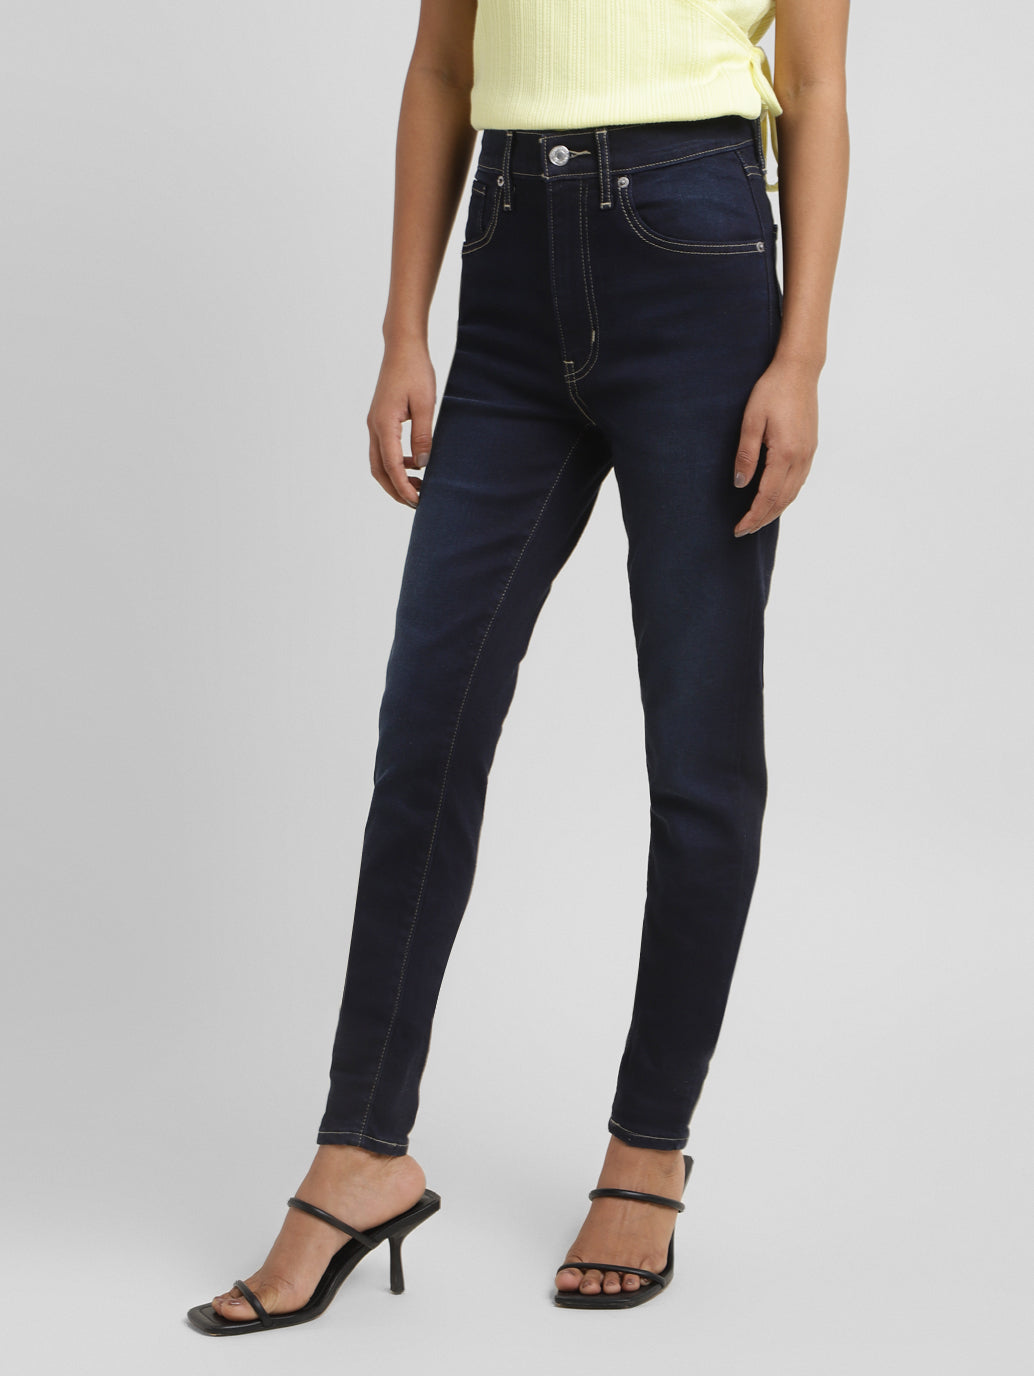 Women's High Rise Mile High Skinny Fit Jeans